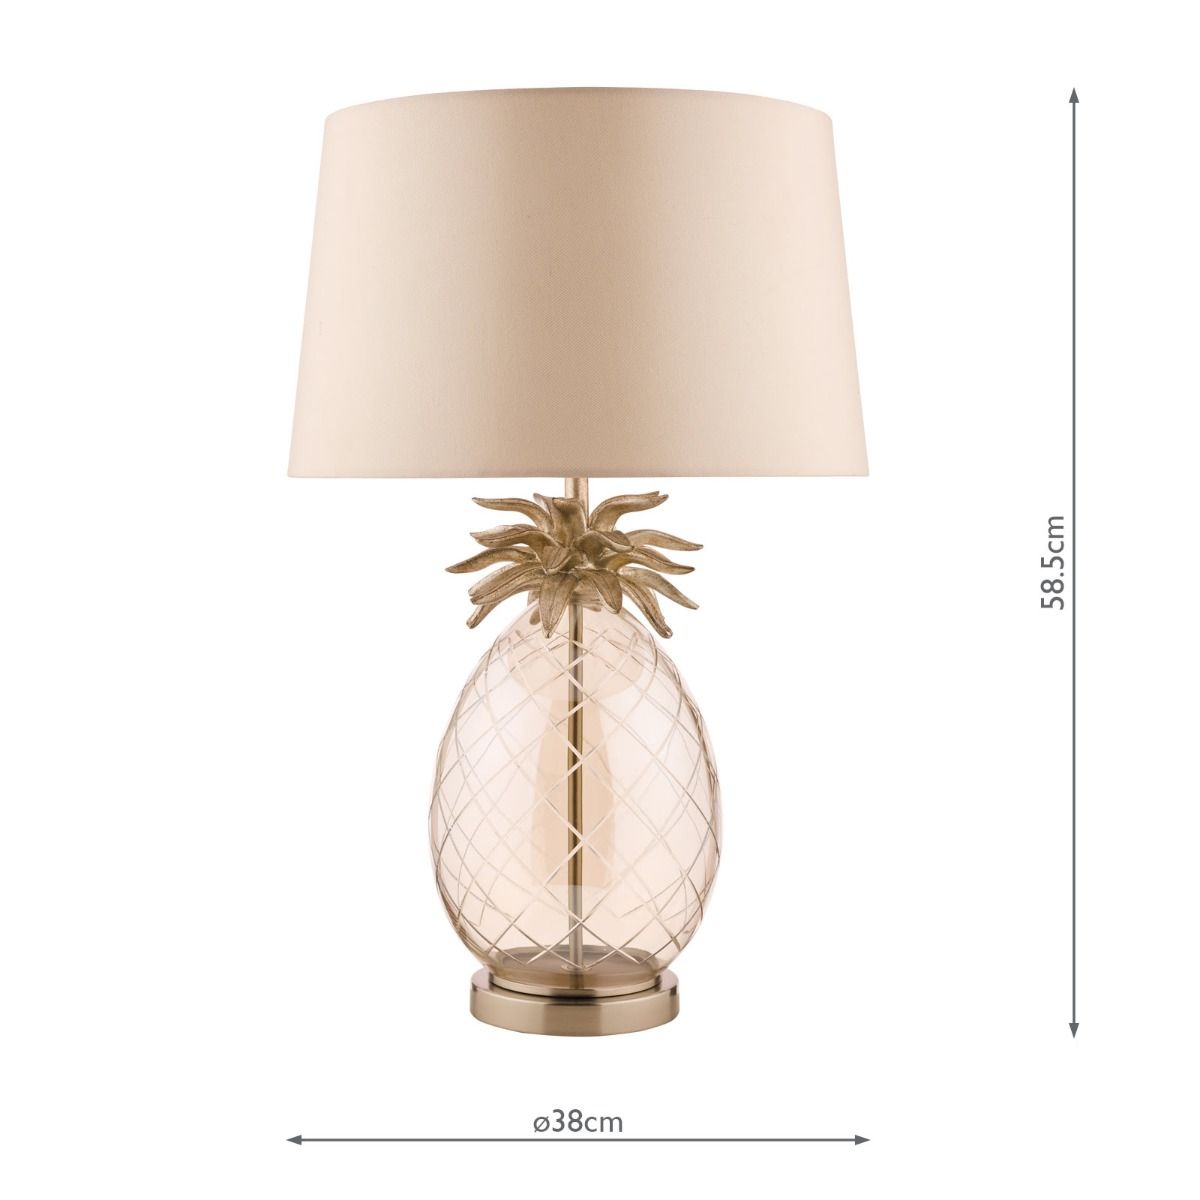 Laura Ashley Pineapple Champagne Cut, Taupe Table Lamp Shades